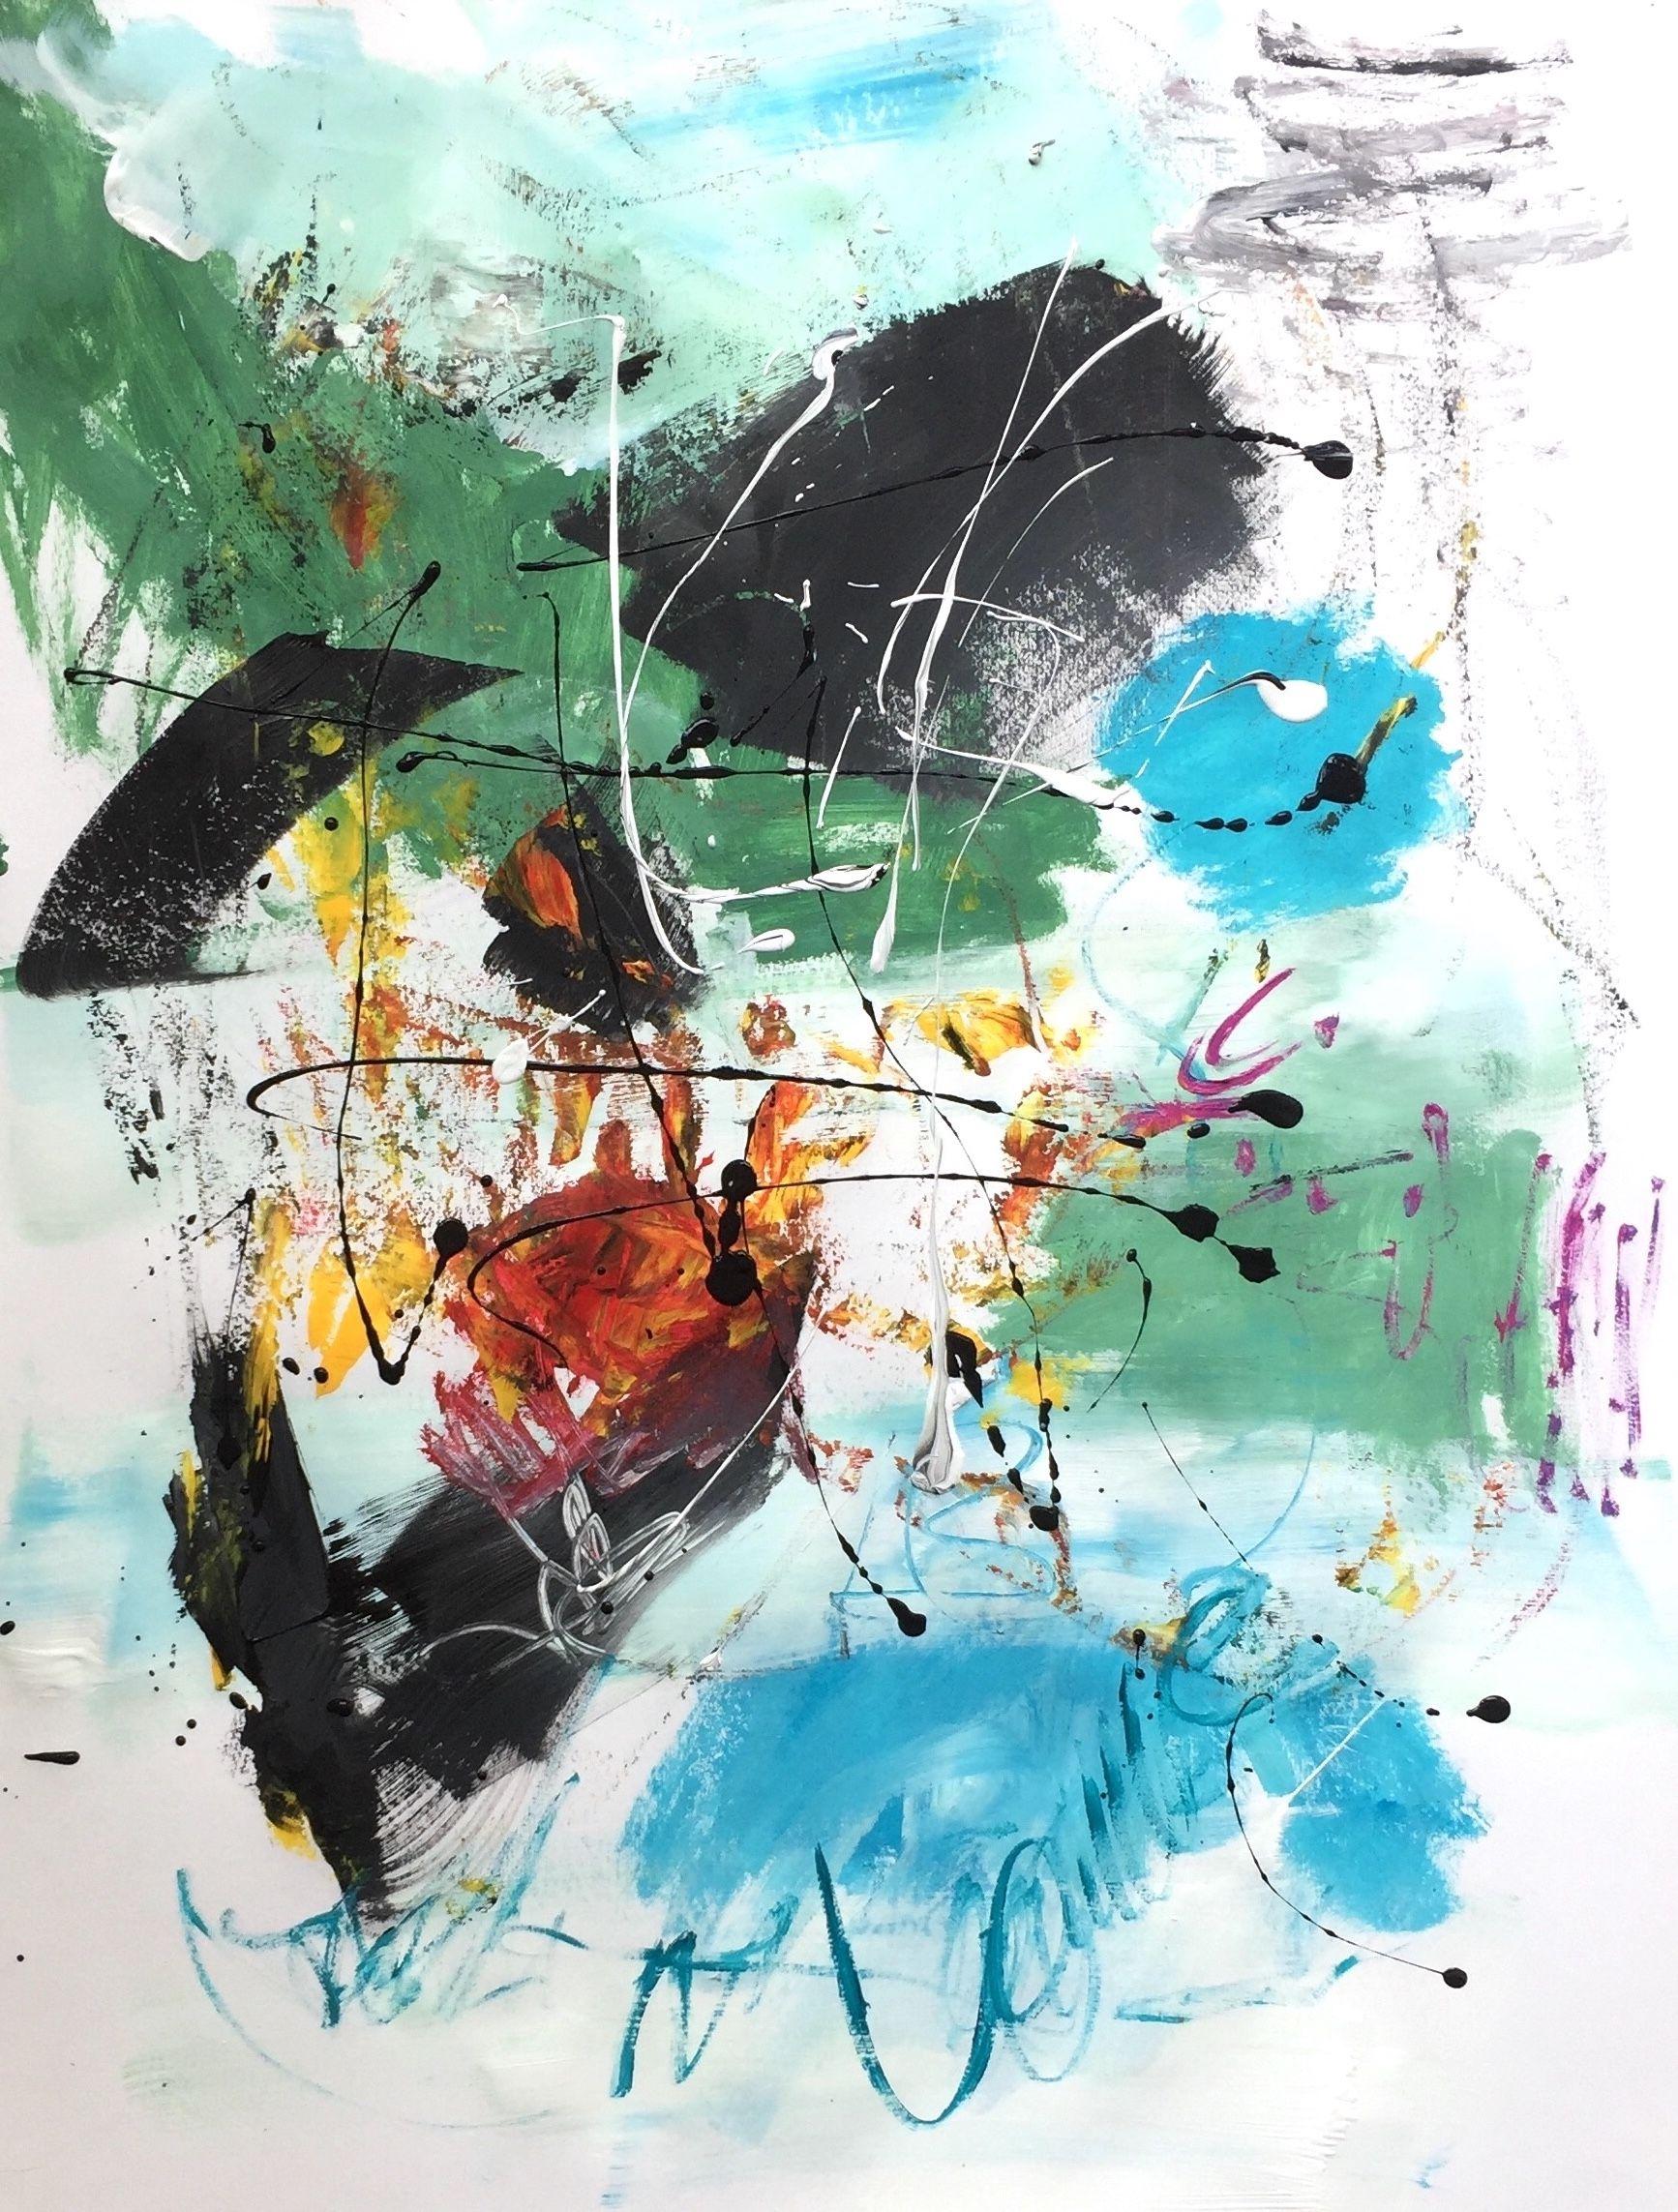 "Schmetterlinge im Bauch (Butterflies in the stomach)" is a gestural-dynamic acrylic painting on paper. Colored areas are lined up with lines and splashes of color. The main colors of this expressive work of art are green, light blue, yellow, black